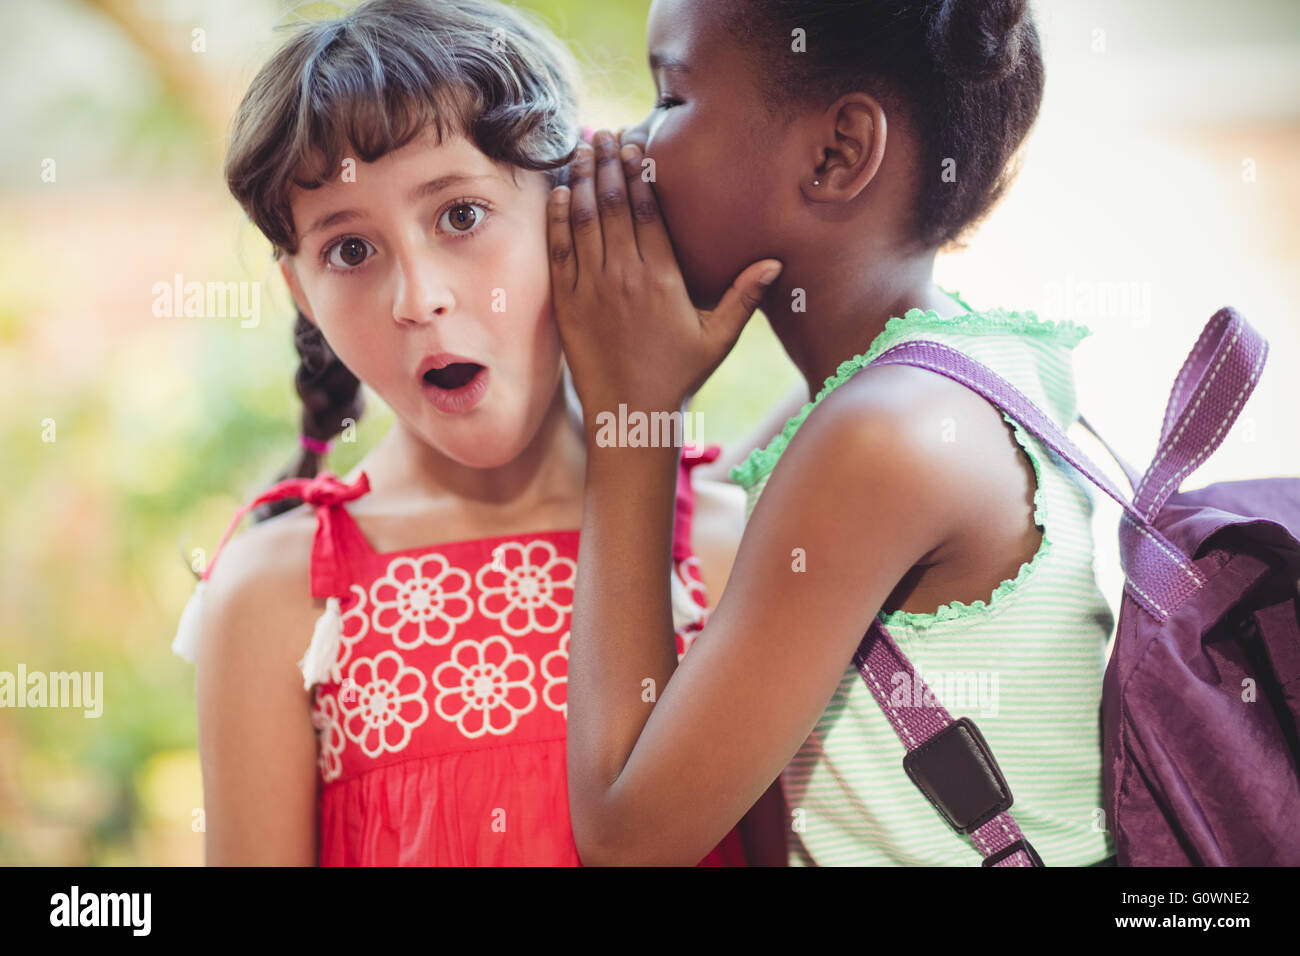 Girl telling a secret to her friend Stock Photo